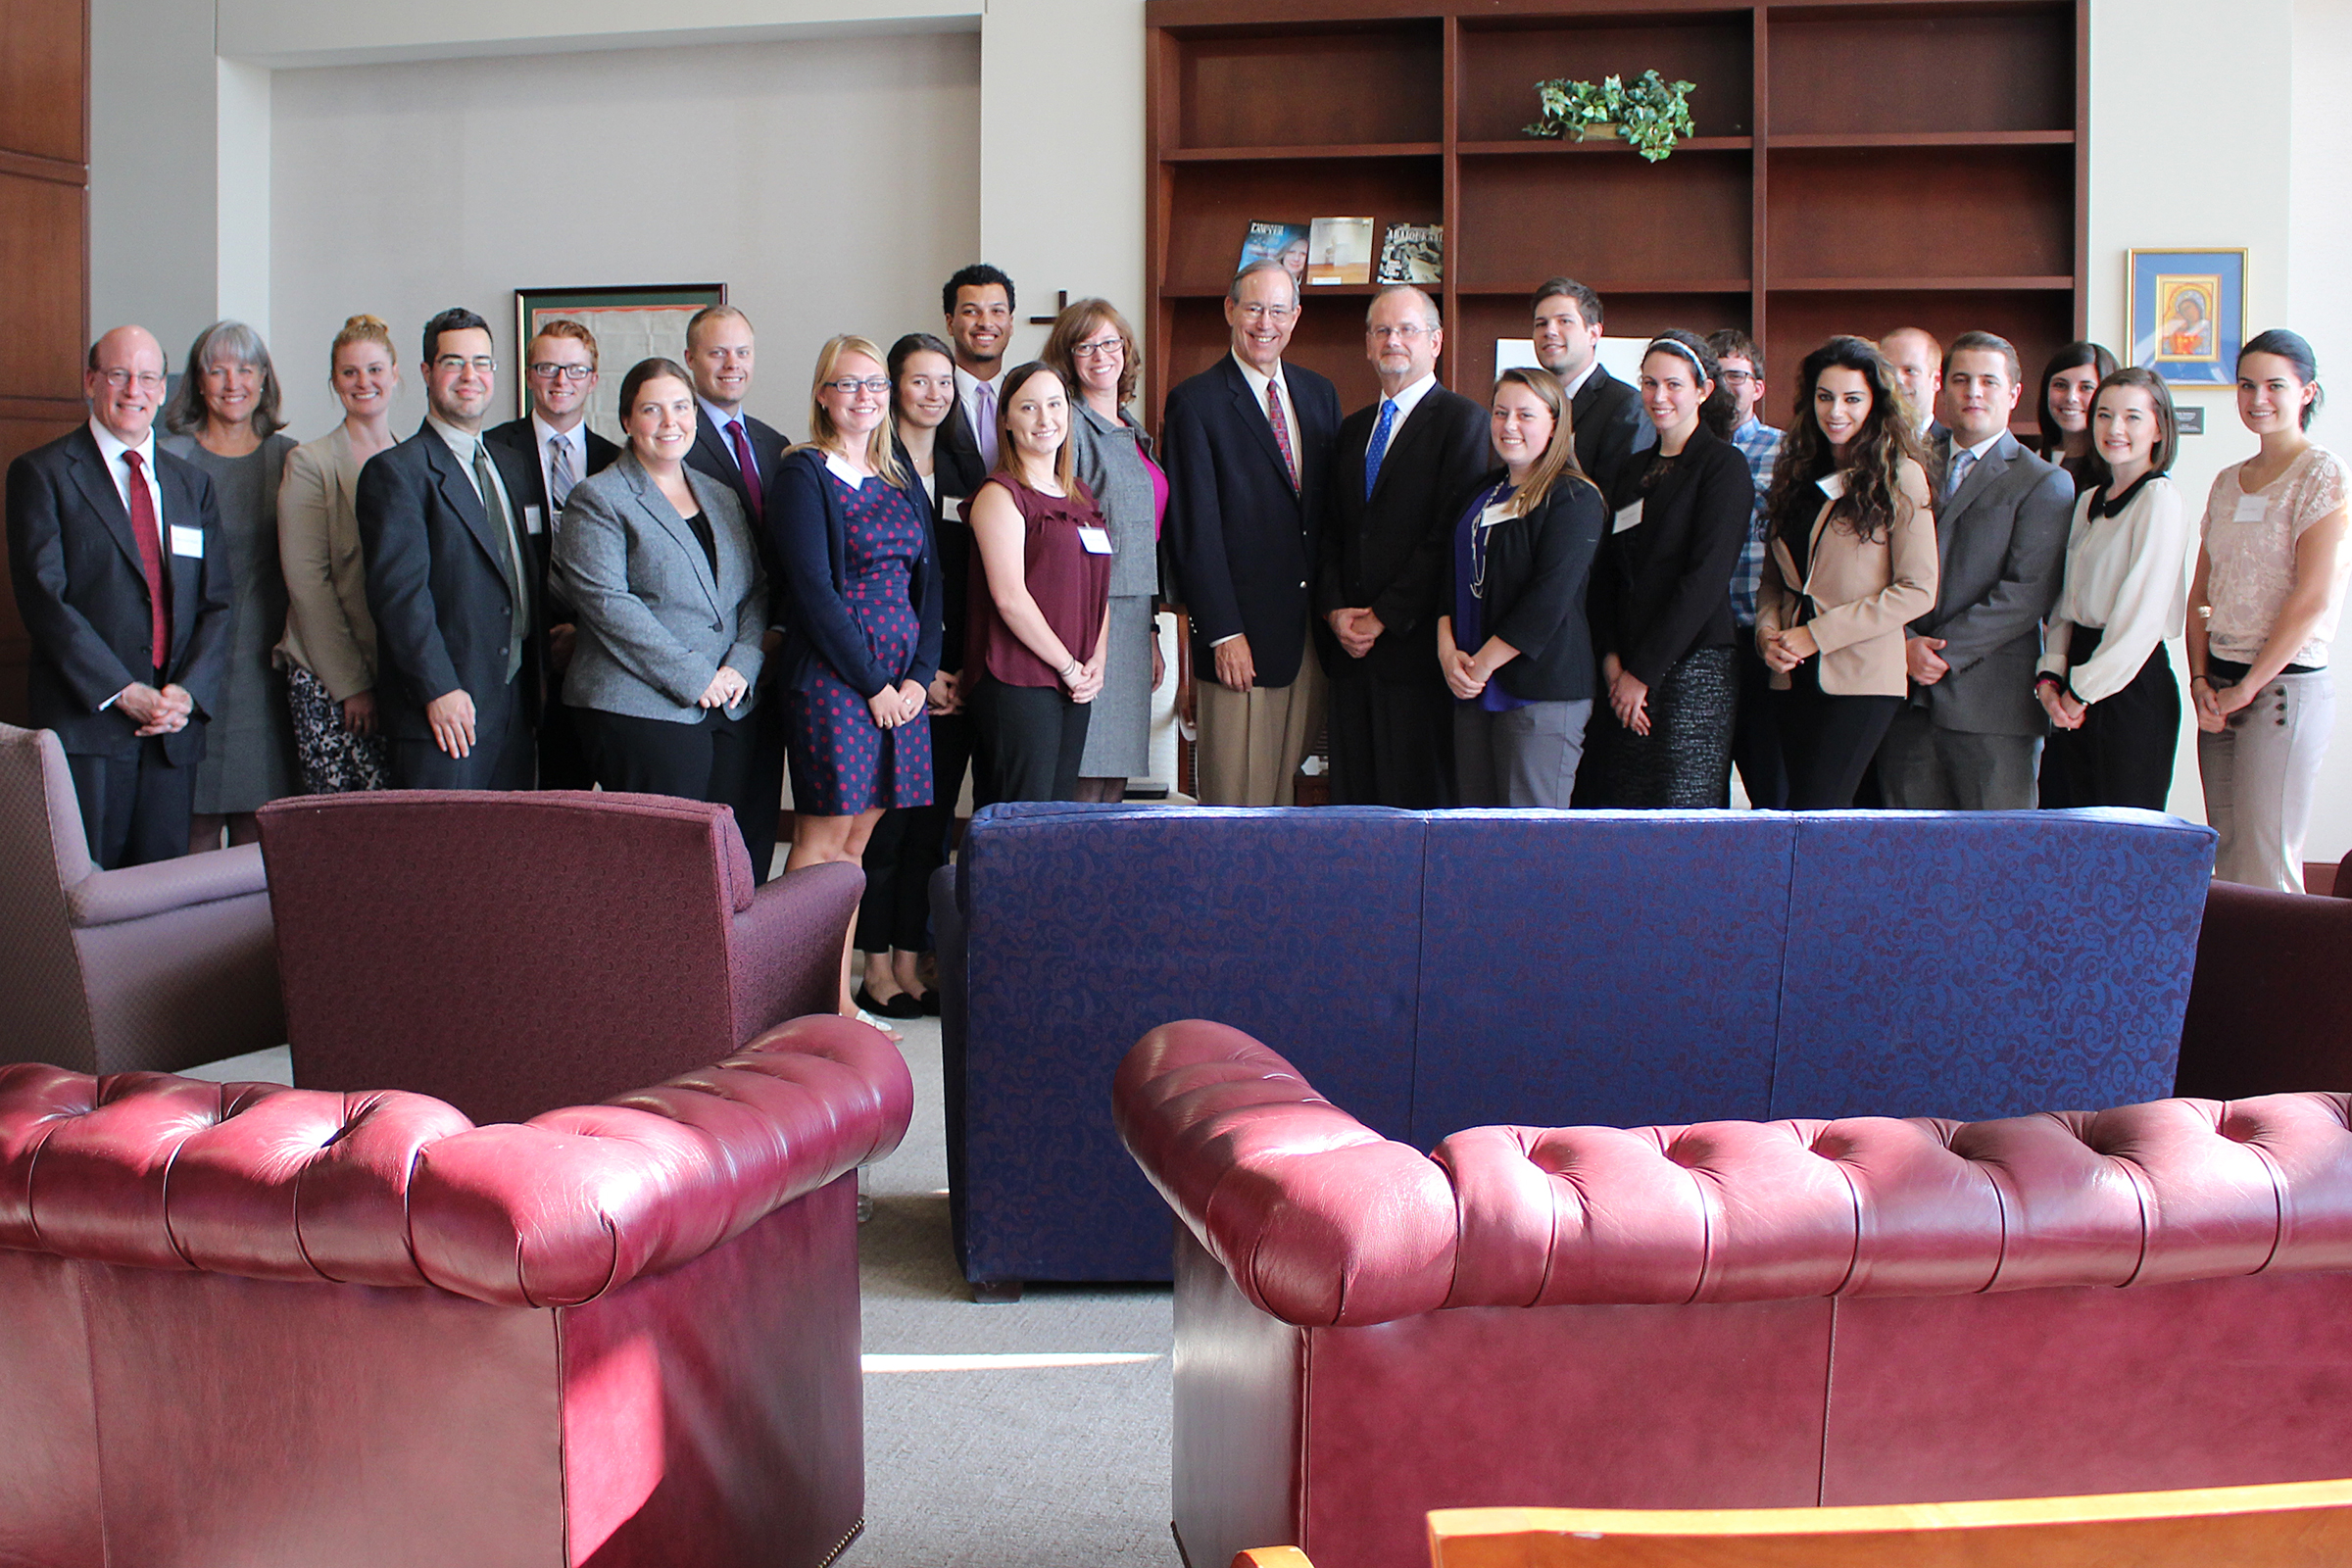 Members of the Leadership Honors Program with Dean Andrew Strauss, LHP Director Susan Wawrose, Roundtable Chair former Ohio Governor Robert Taft and speaker Prof. Lawrence Lessig.